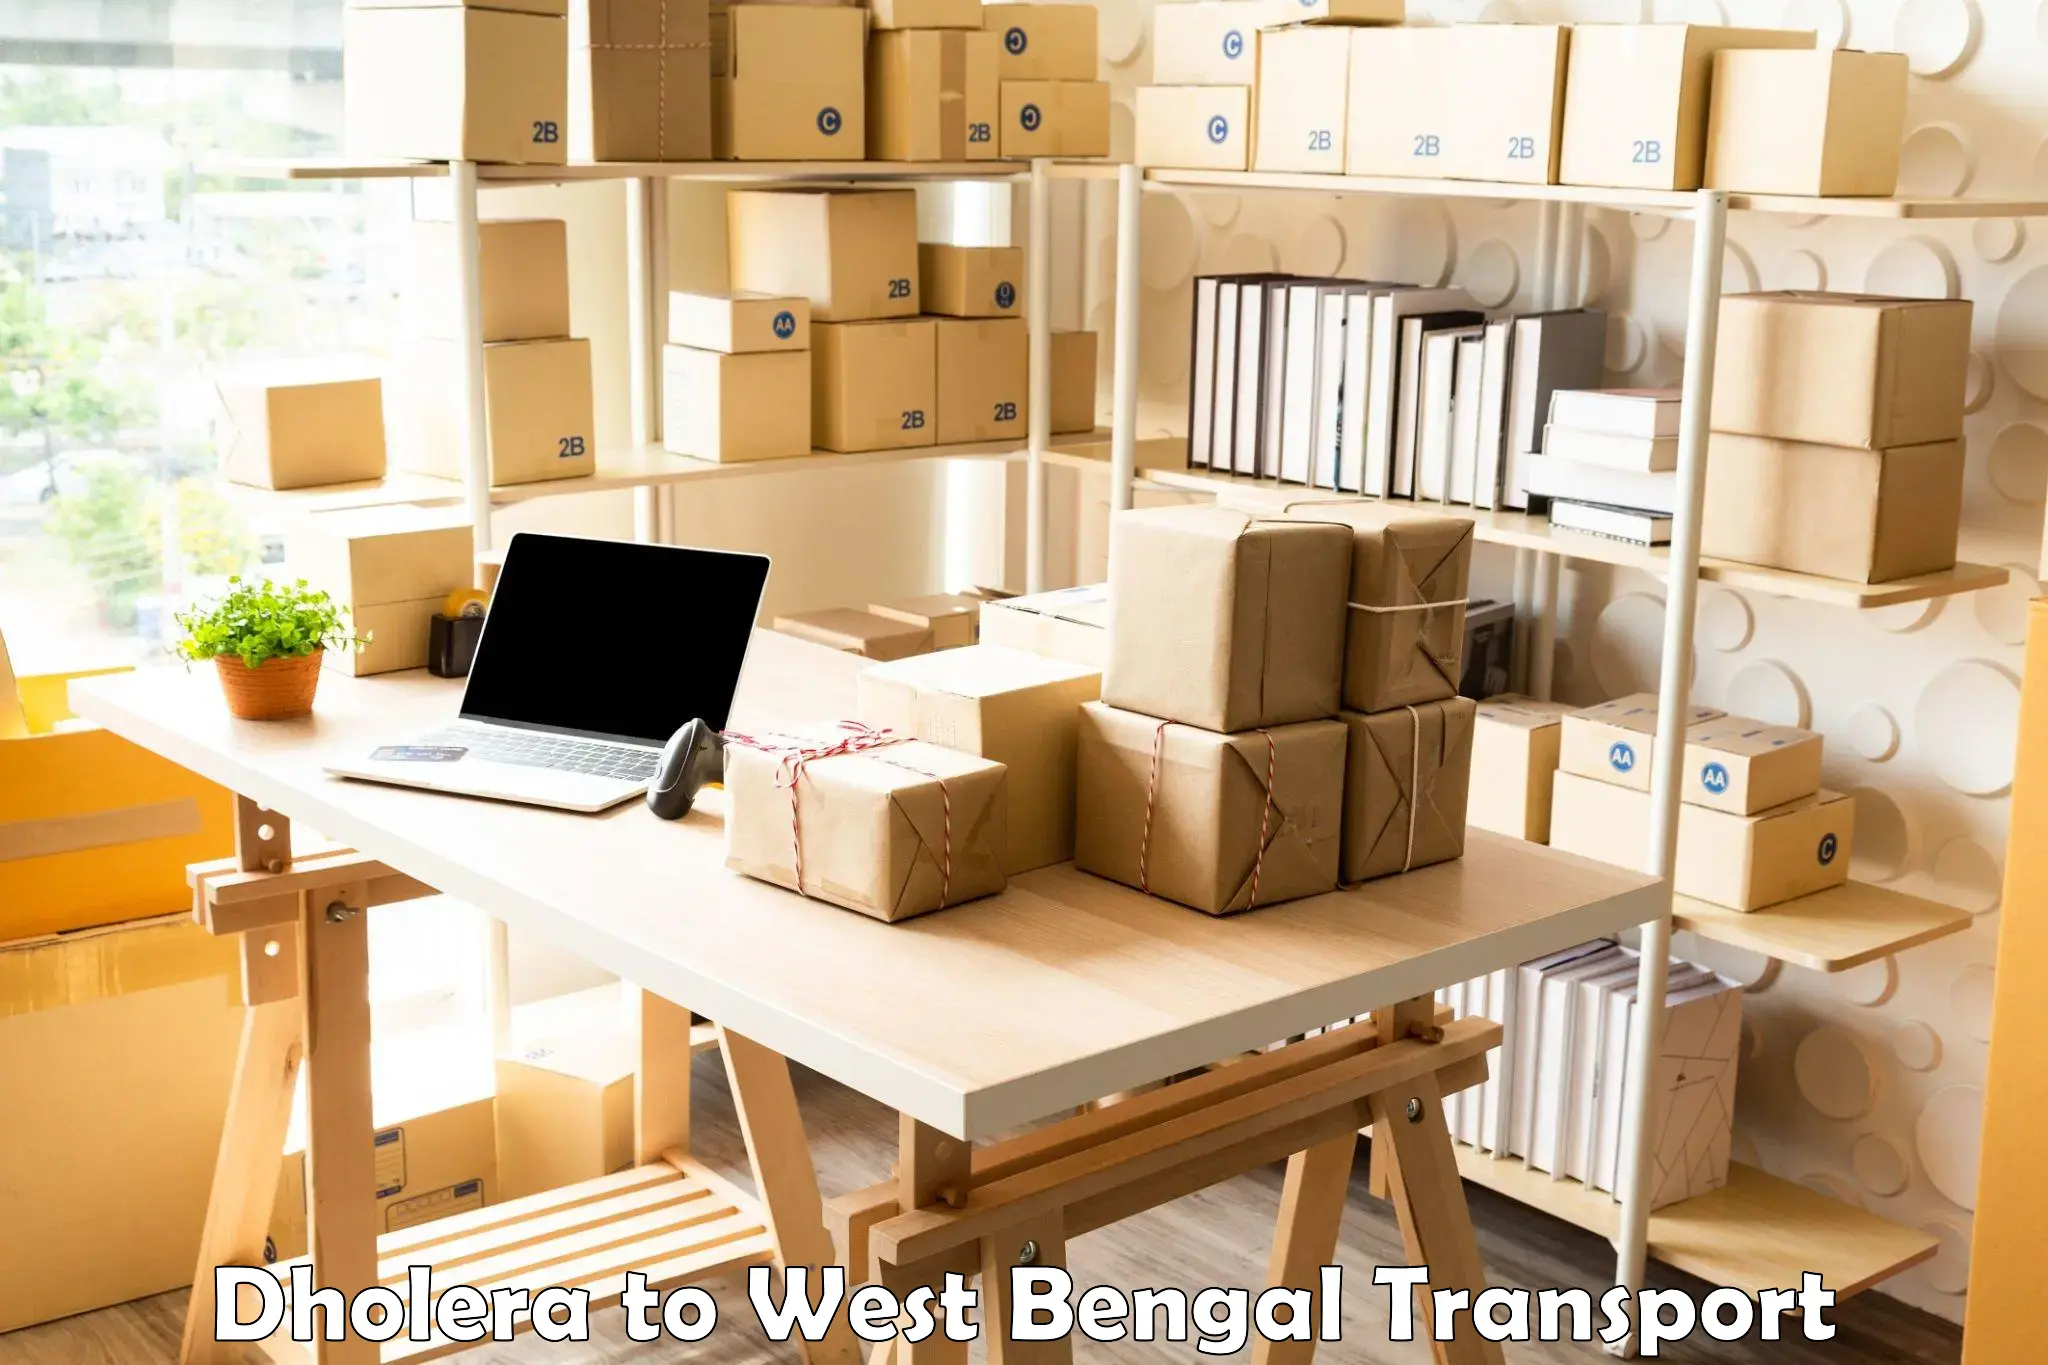 Nearby transport service in Dholera to Durgapur